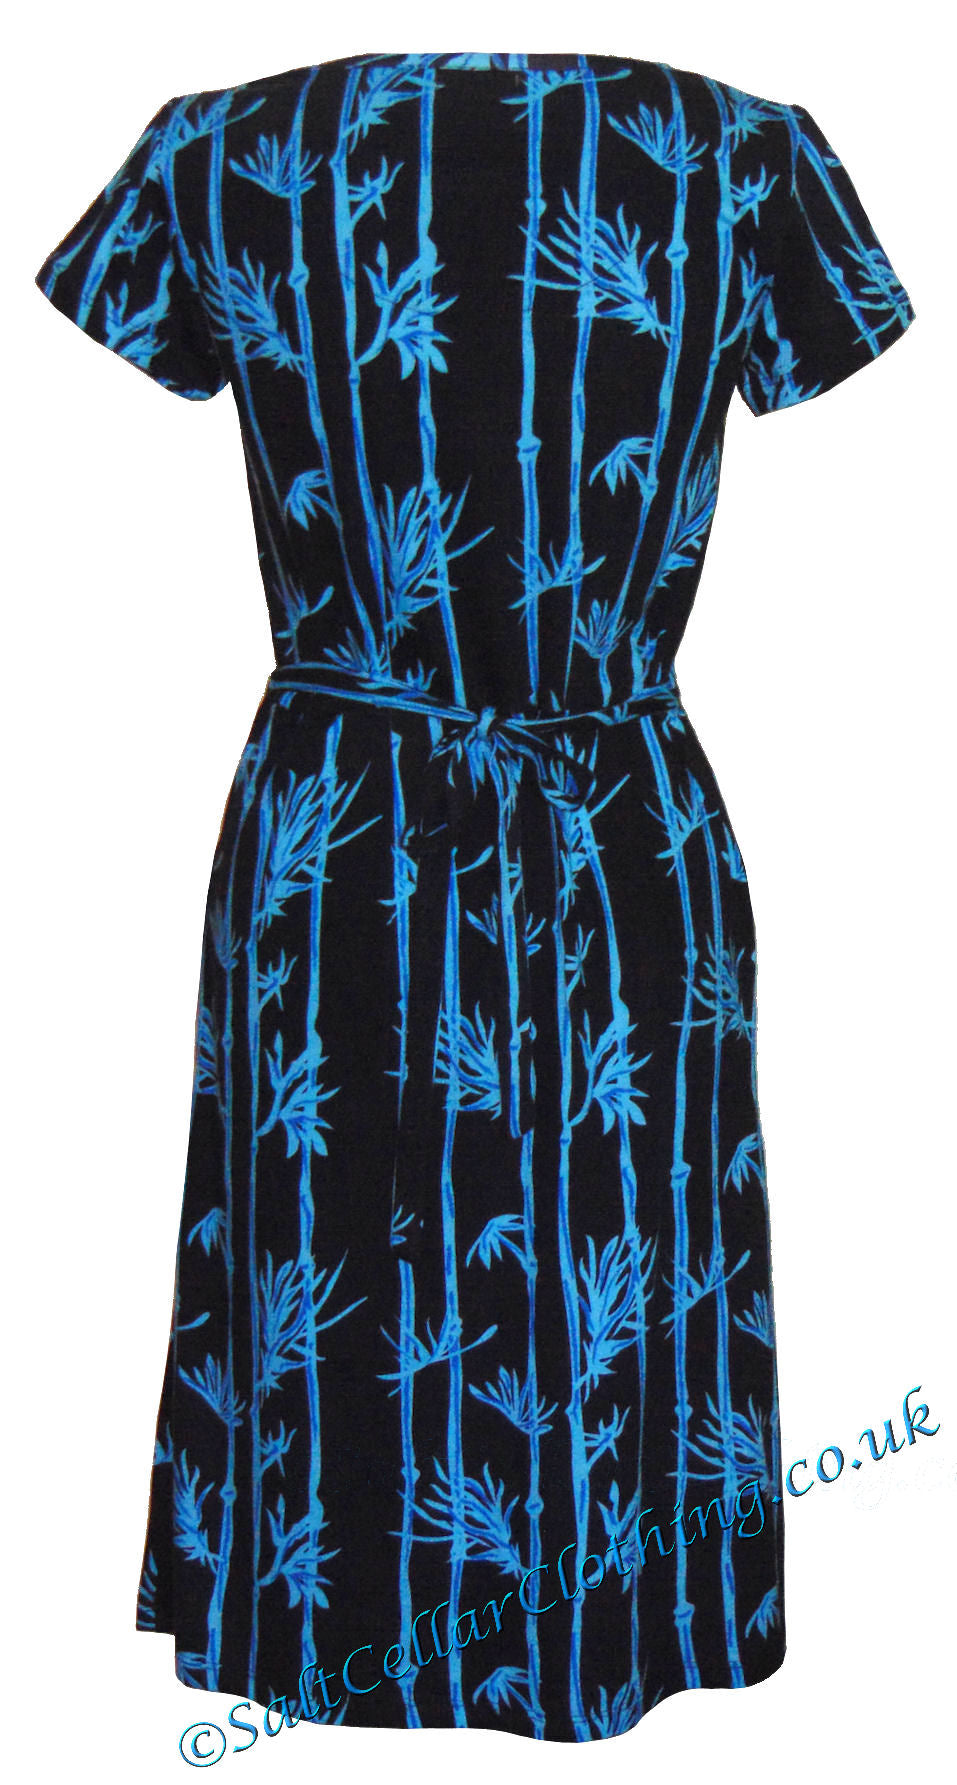 Mudd & Water Womens 'End of the Day' Dress - Navy / Bamboo Print